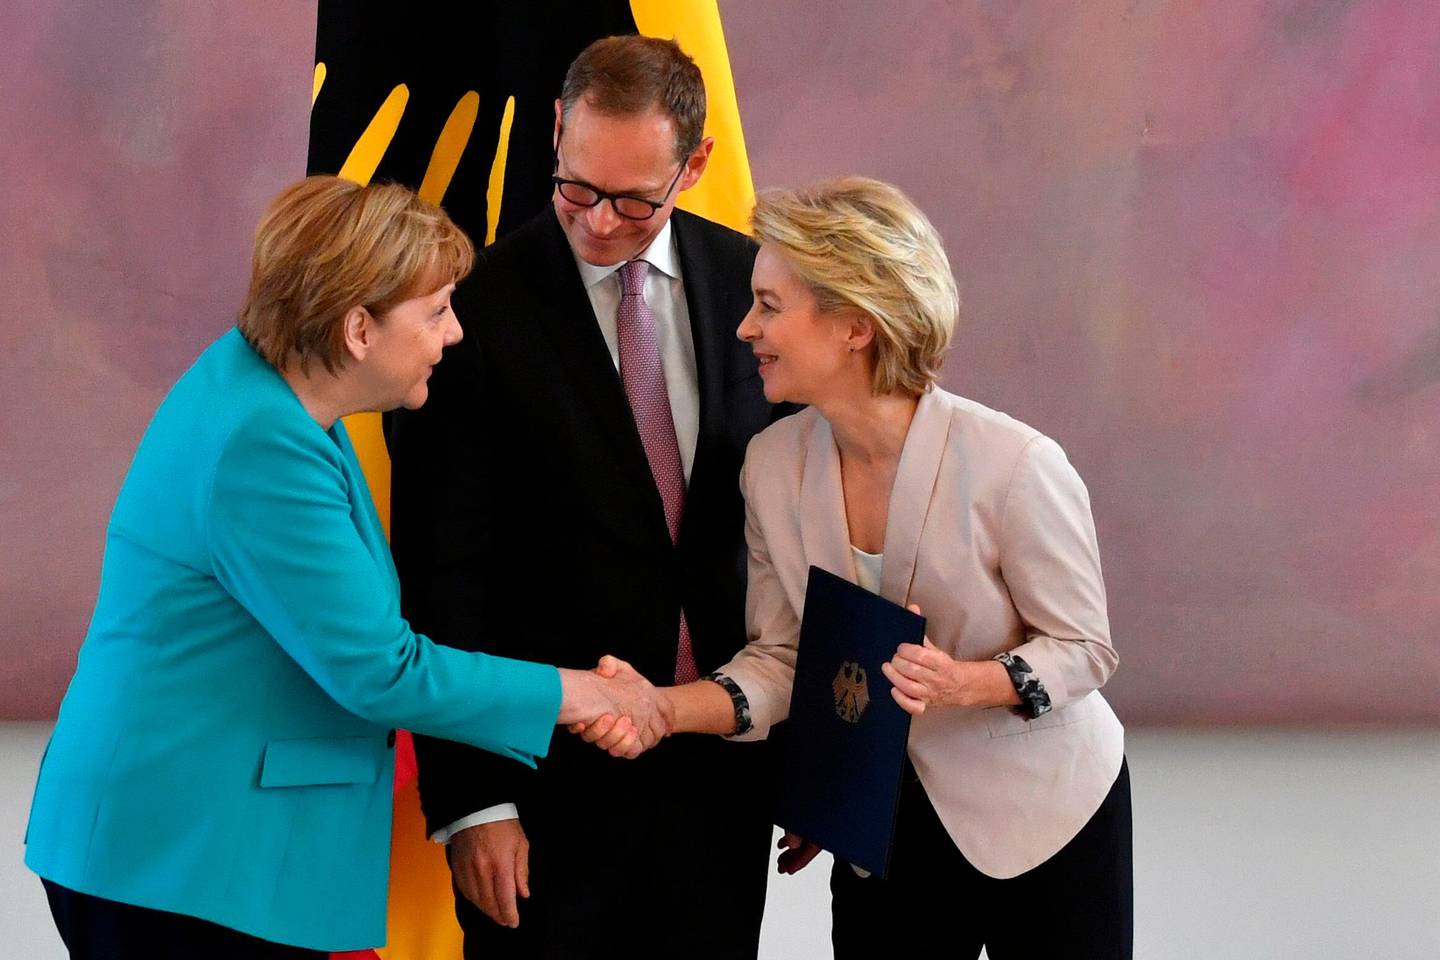 German Chancellor Angela Merkel (L) shakes hands with outgoing minister Ursula von der Leyen (R) as the vice-president of the Bundesrat (upper house of parliament) Michael Mueller watches during a handover ceremony on July 17, 2019 at Bellevue Castle in Berlin. - The leader of the CDU party Minister Annegret Kramp-Karrenbauer replaces newly elected European Commission President Von der Leyen. (Photo by John MACDOUGALL / AFP)